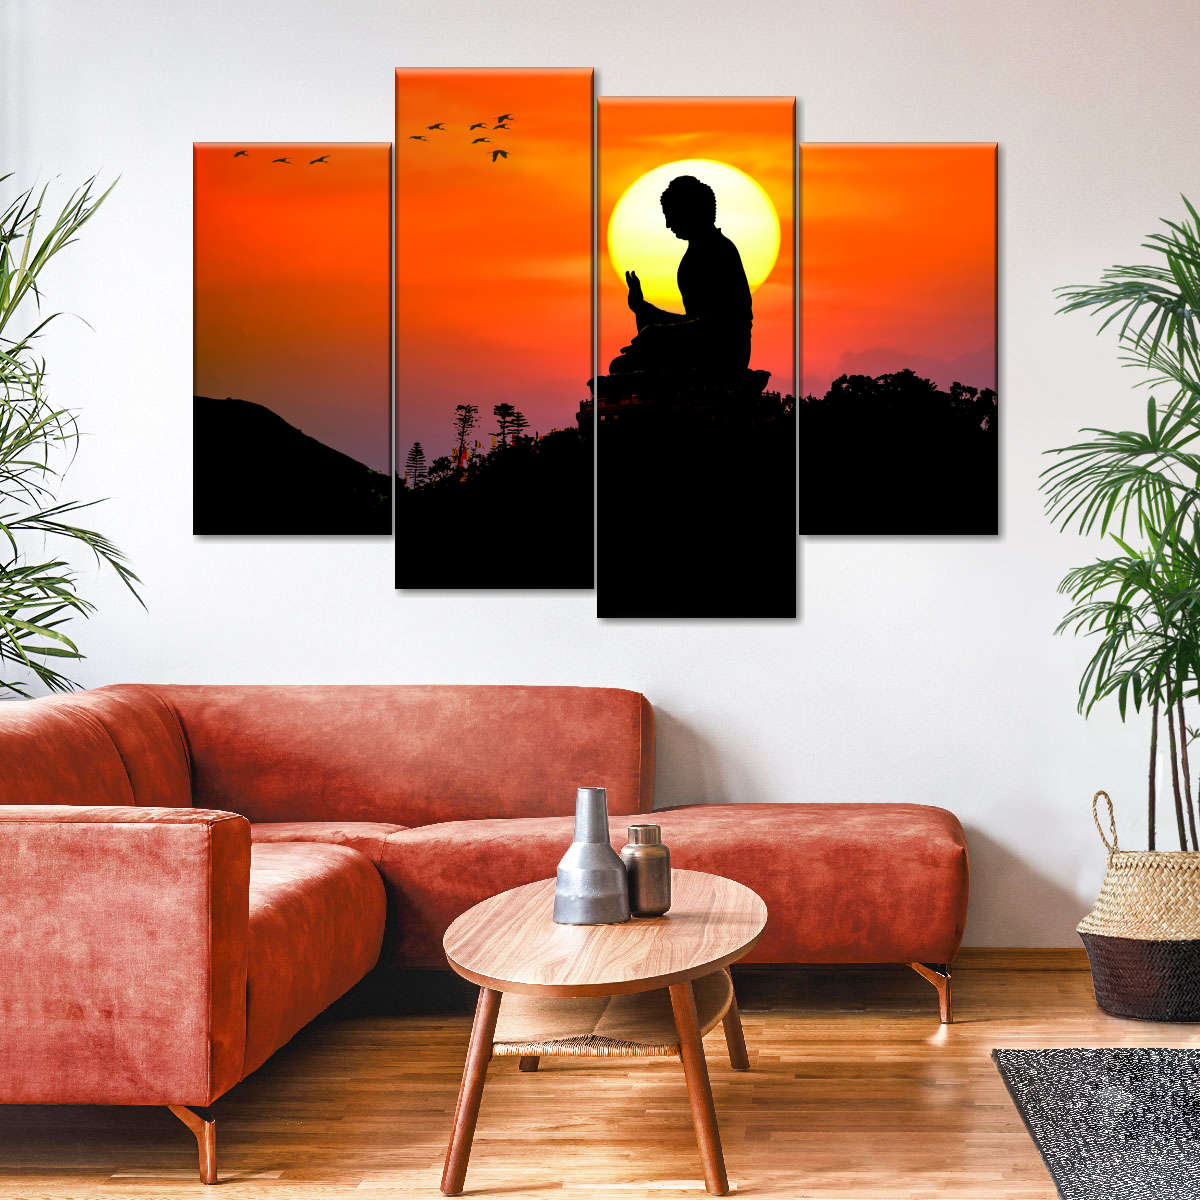 Buddha sitting on a hill at sunset canvas art for decorating the living room.